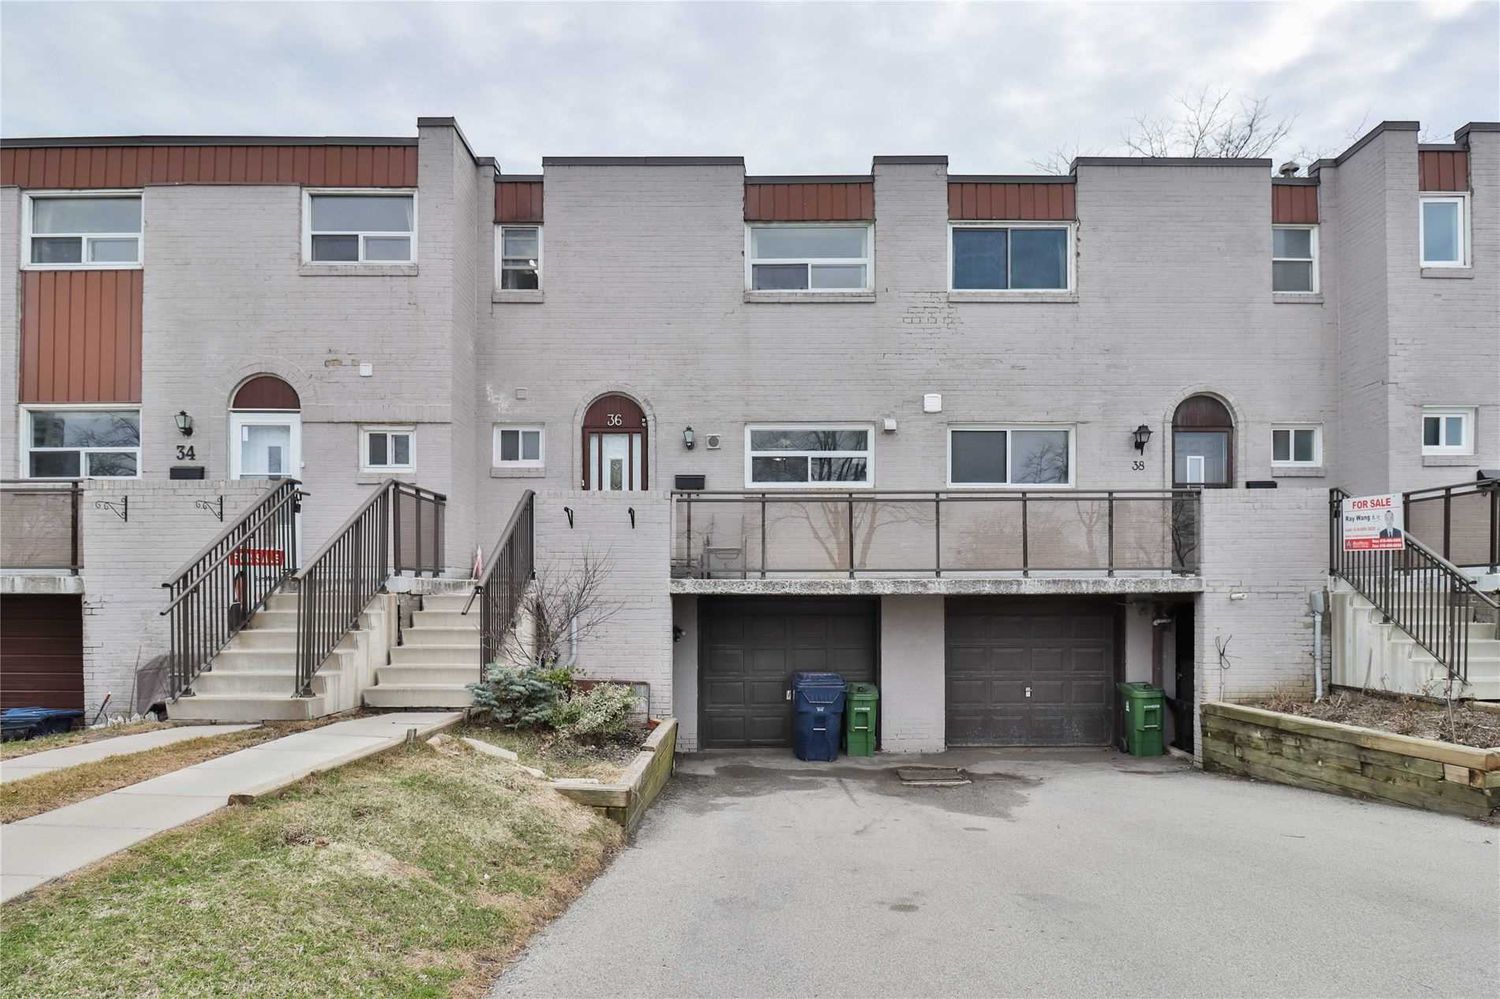 3-50 King Henrys Boulevard. 50 King Henrys Boulevard Townhouses is located in  Scarborough, Toronto - image #1 of 2